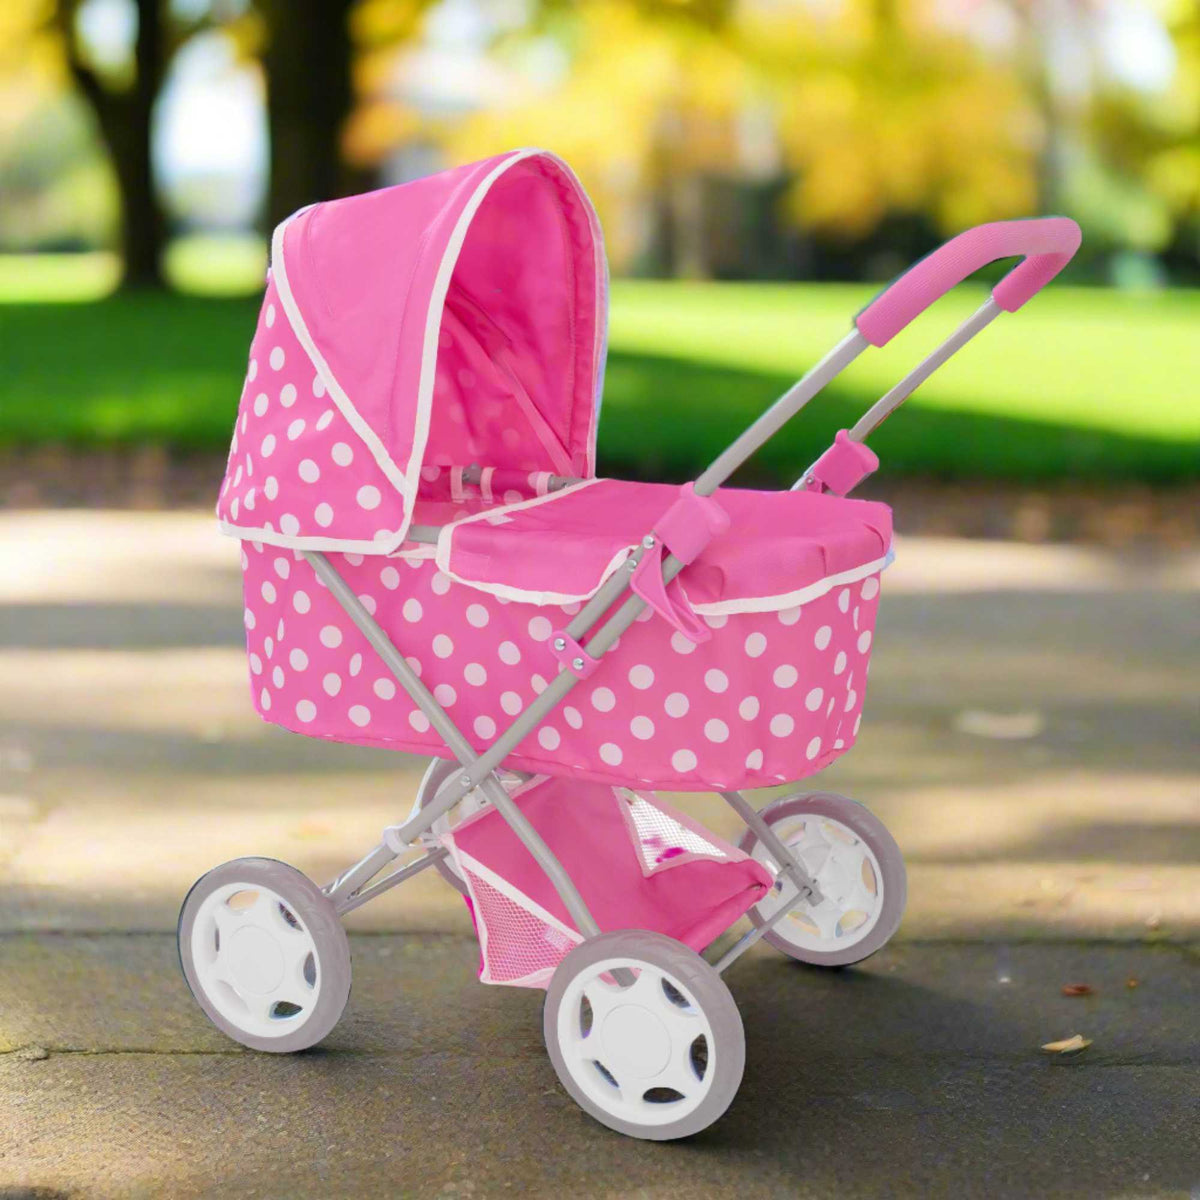 Dolly Tots Baby Dolls Pram - Cute and Sturdy Toy Pram for Baby Dolls, Ideal for Pretend Play